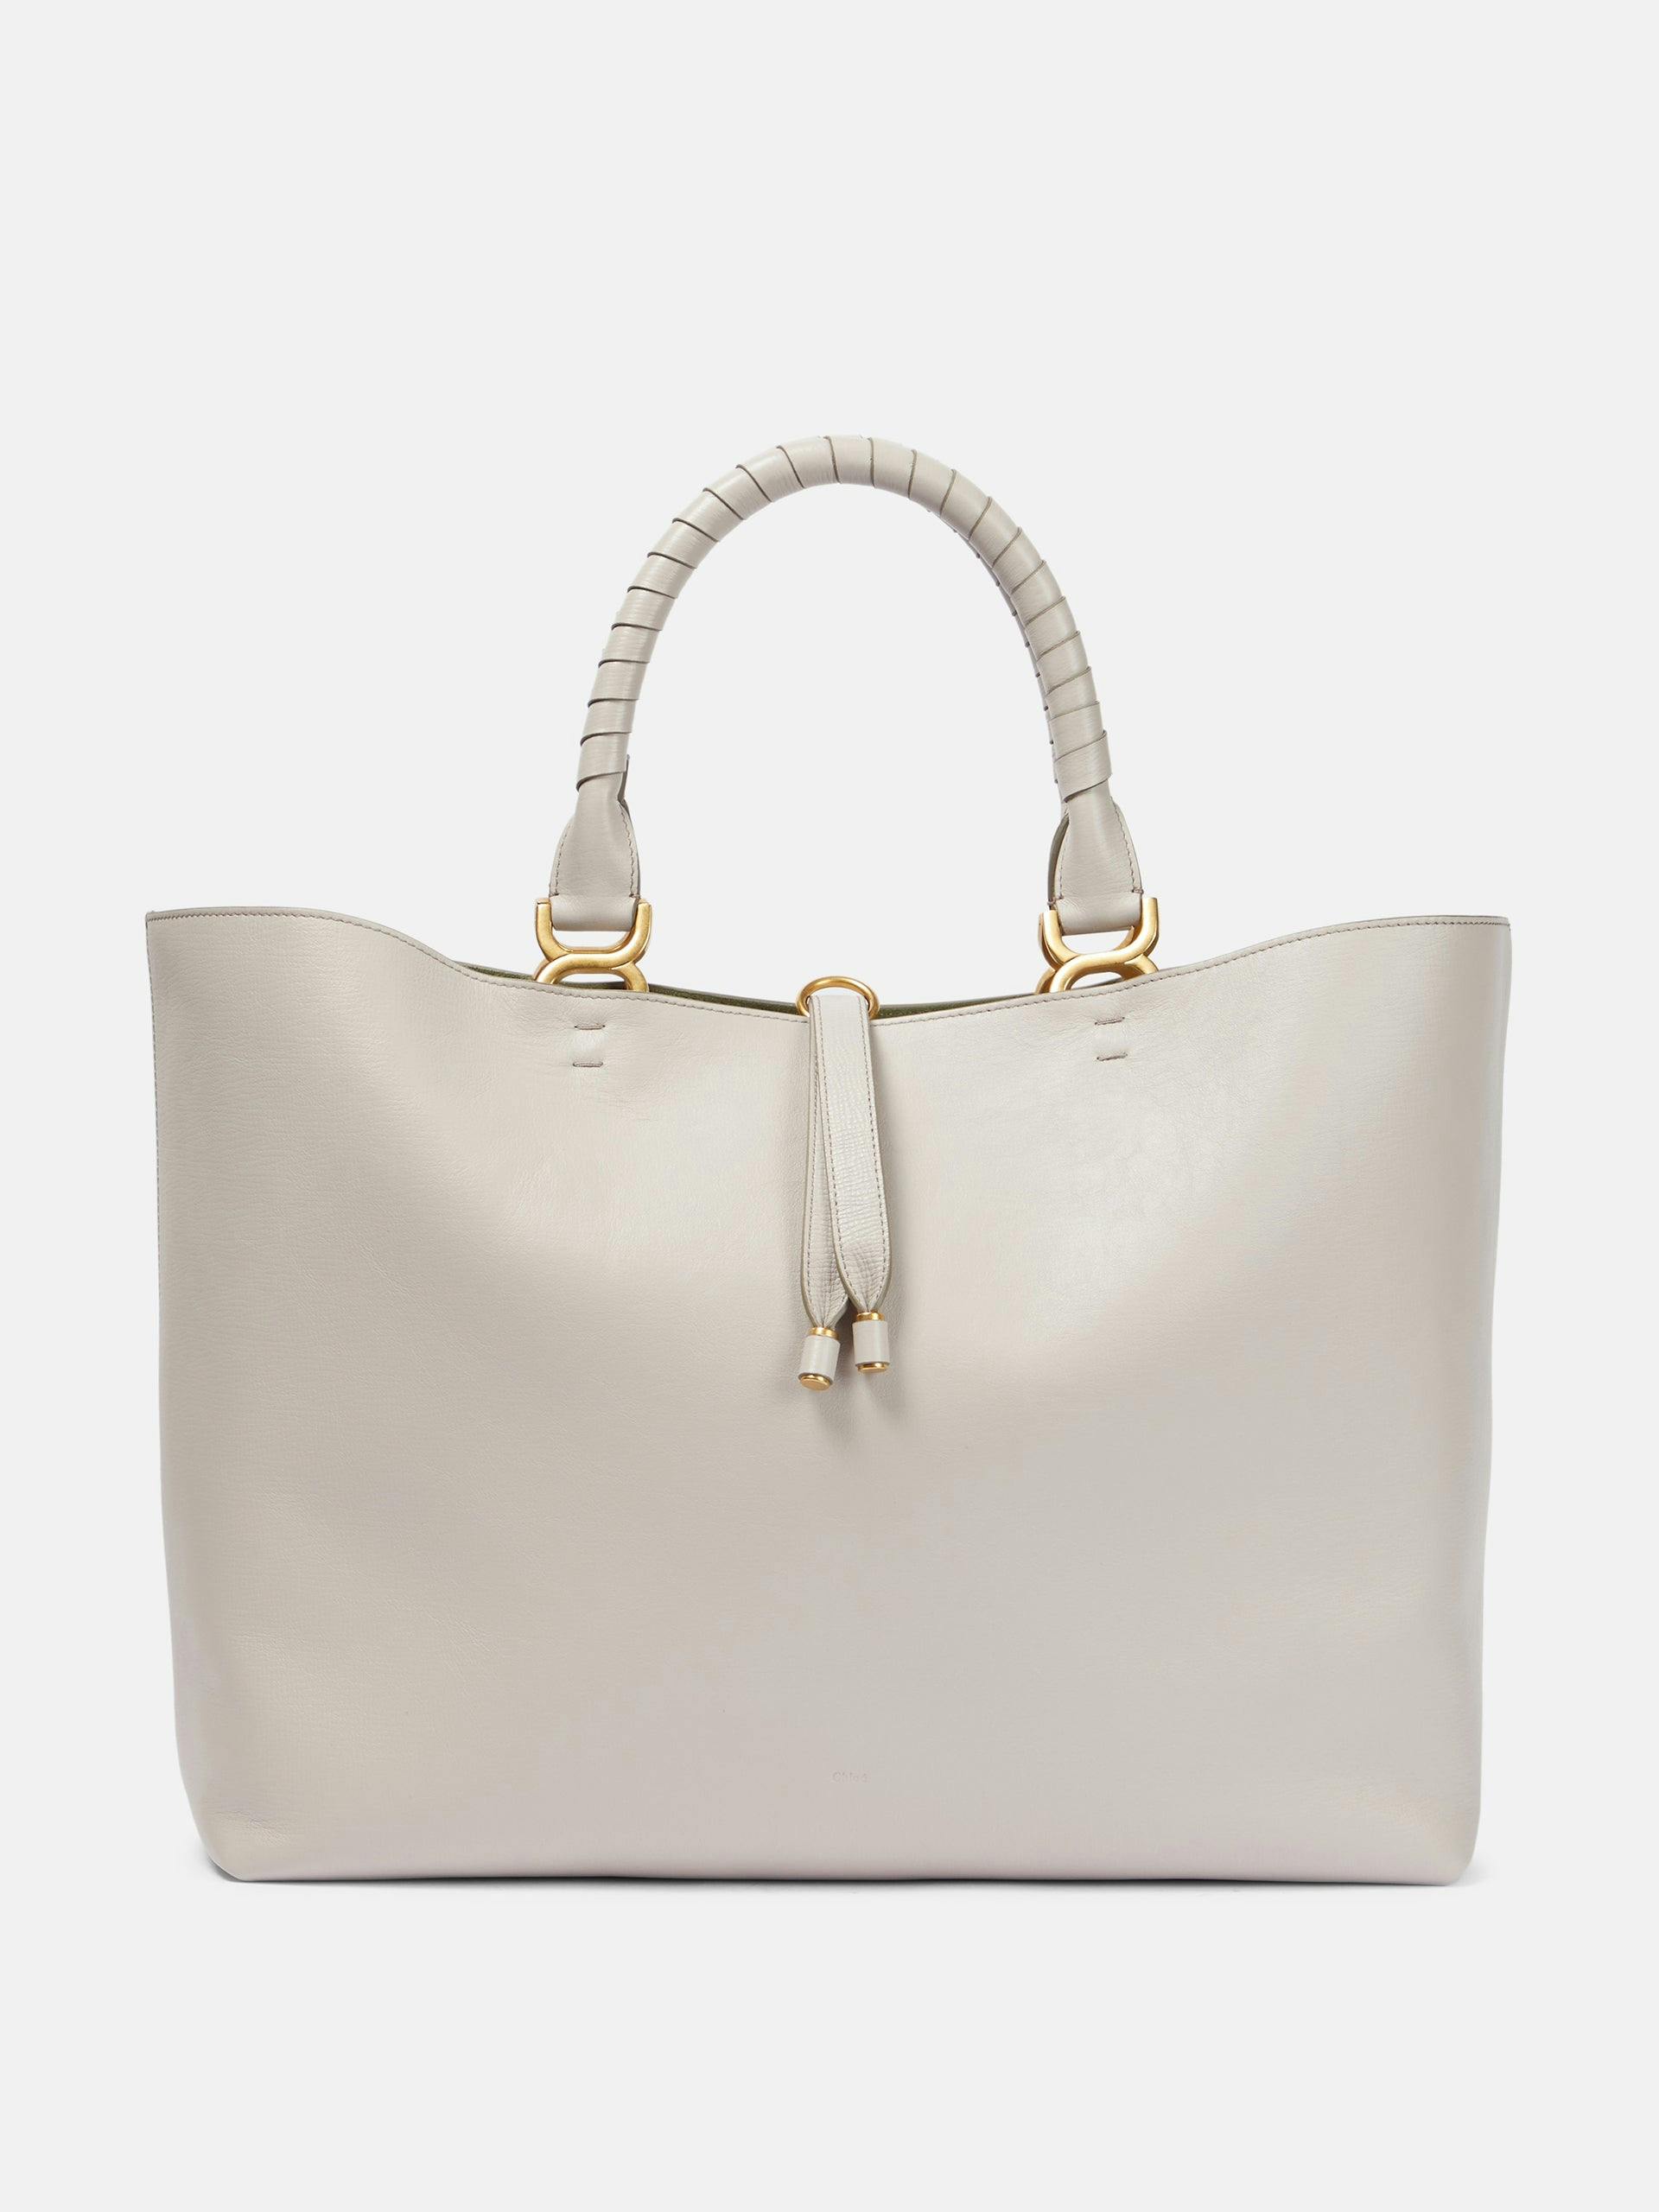 Large white leather tote bag